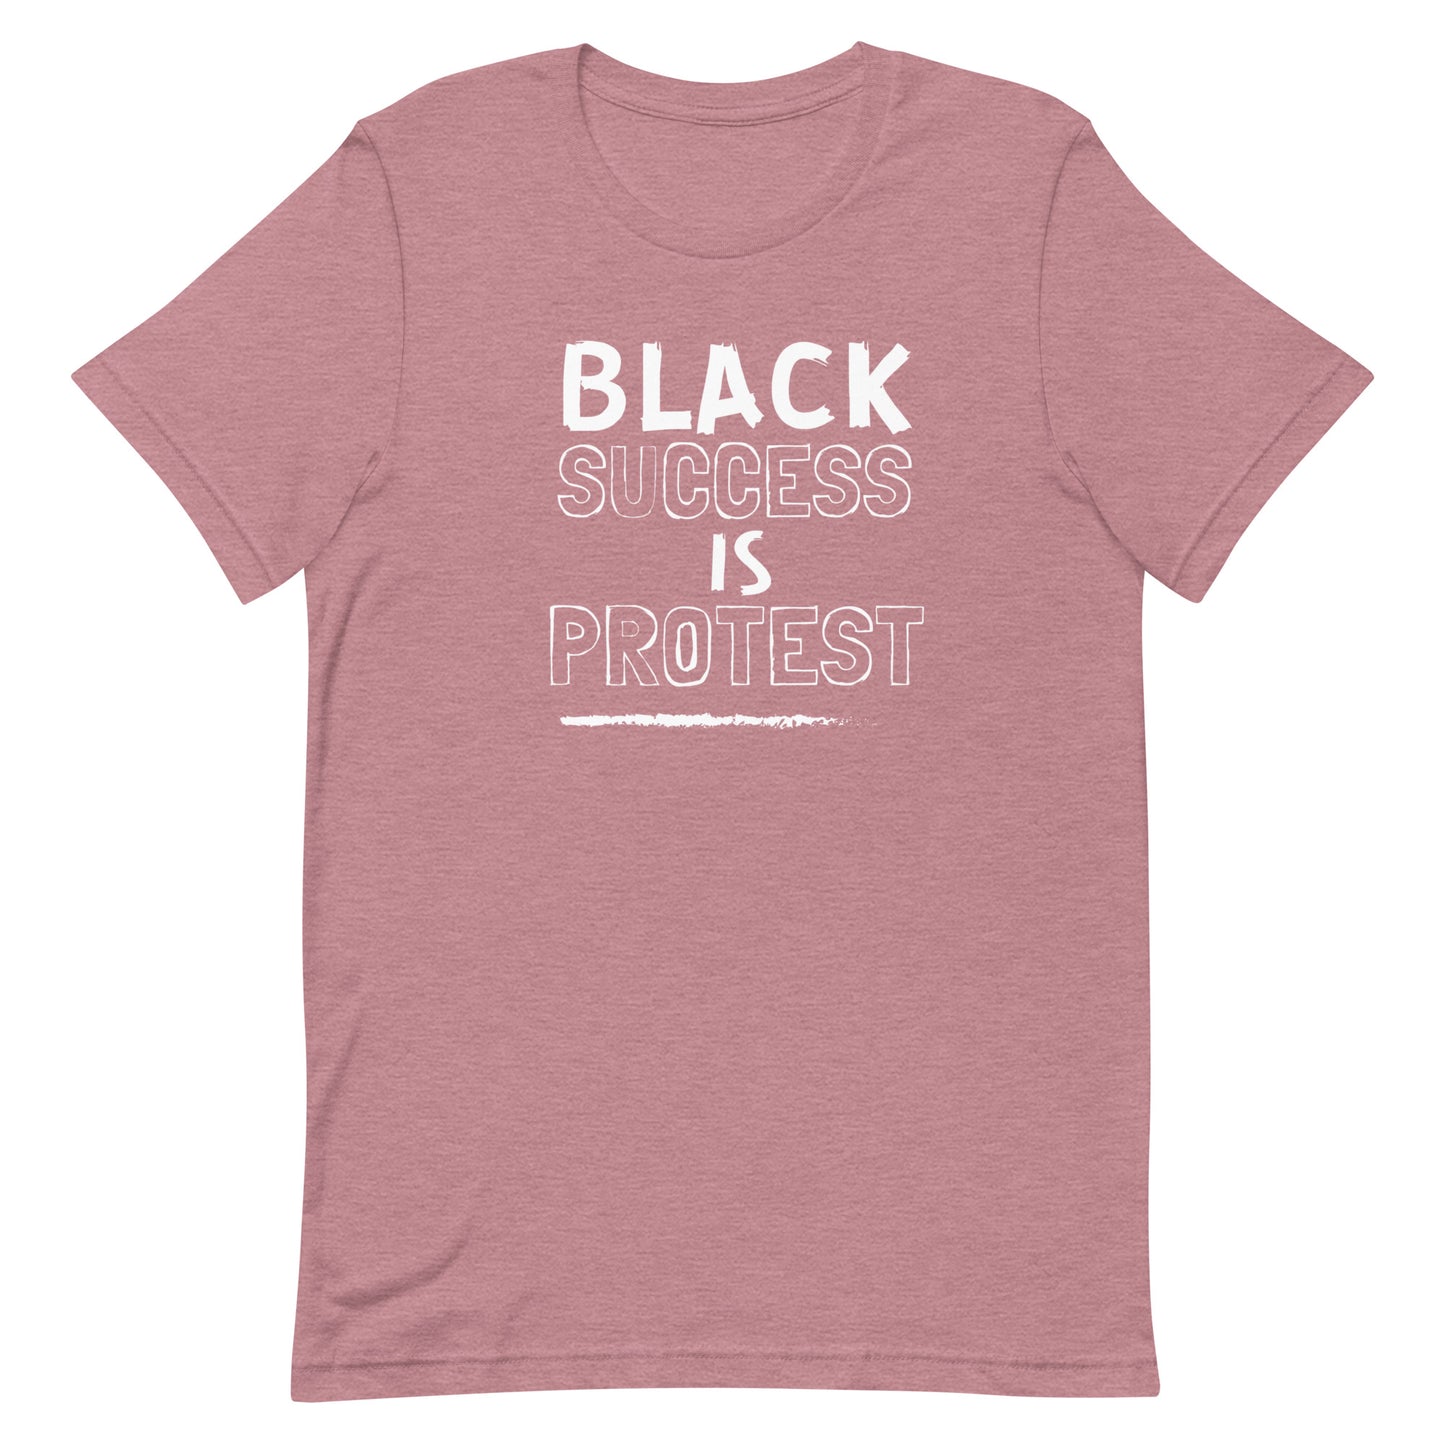 Black Success Is Protest T-shirt with White Text